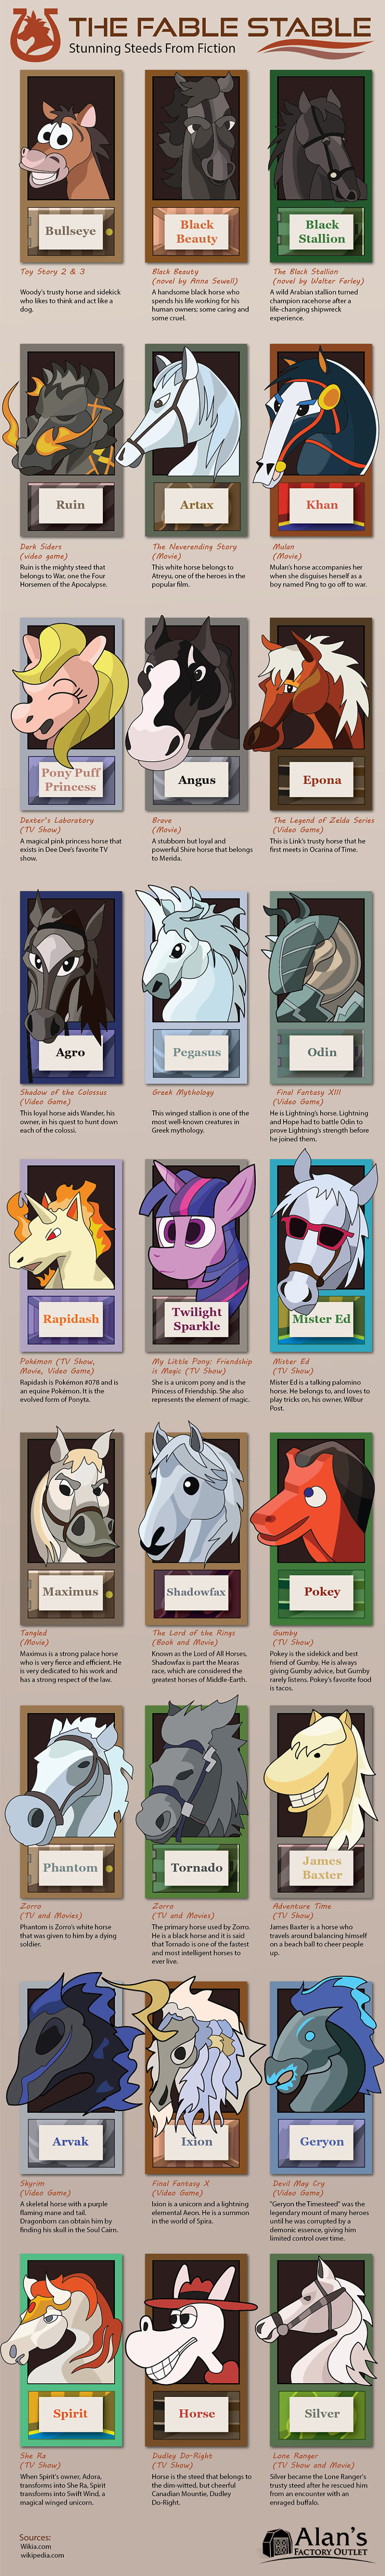 The Most Iconic Horses Of All Time